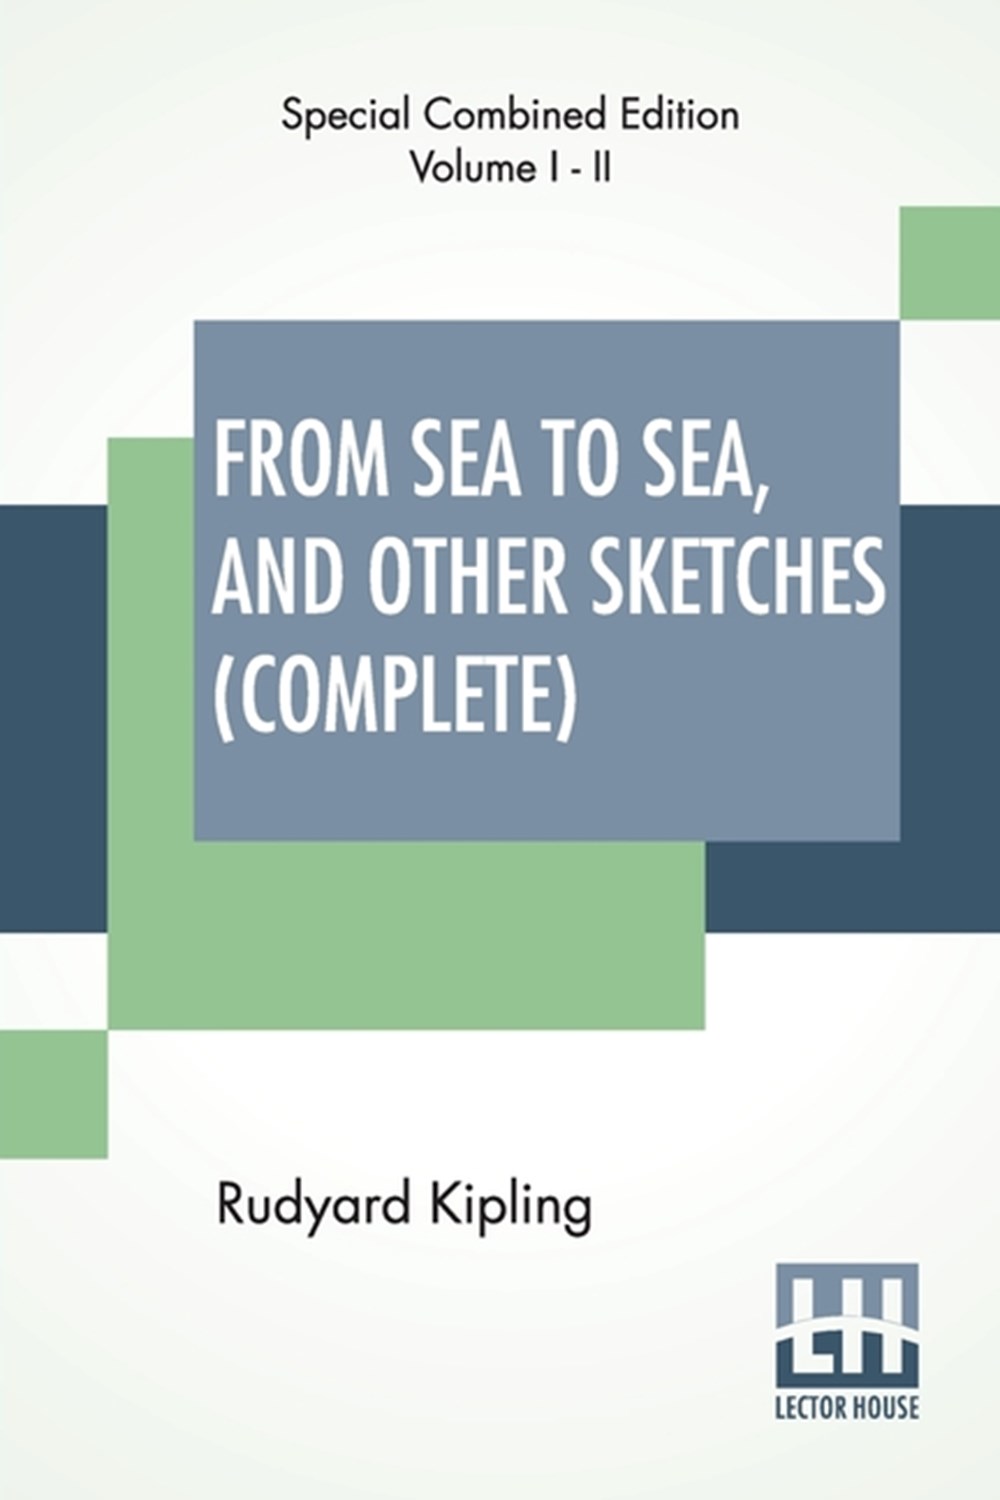 From Sea To Sea, And Other Sketches (Complete) Letters Of Travel, Complete Edition Of Two Volumes